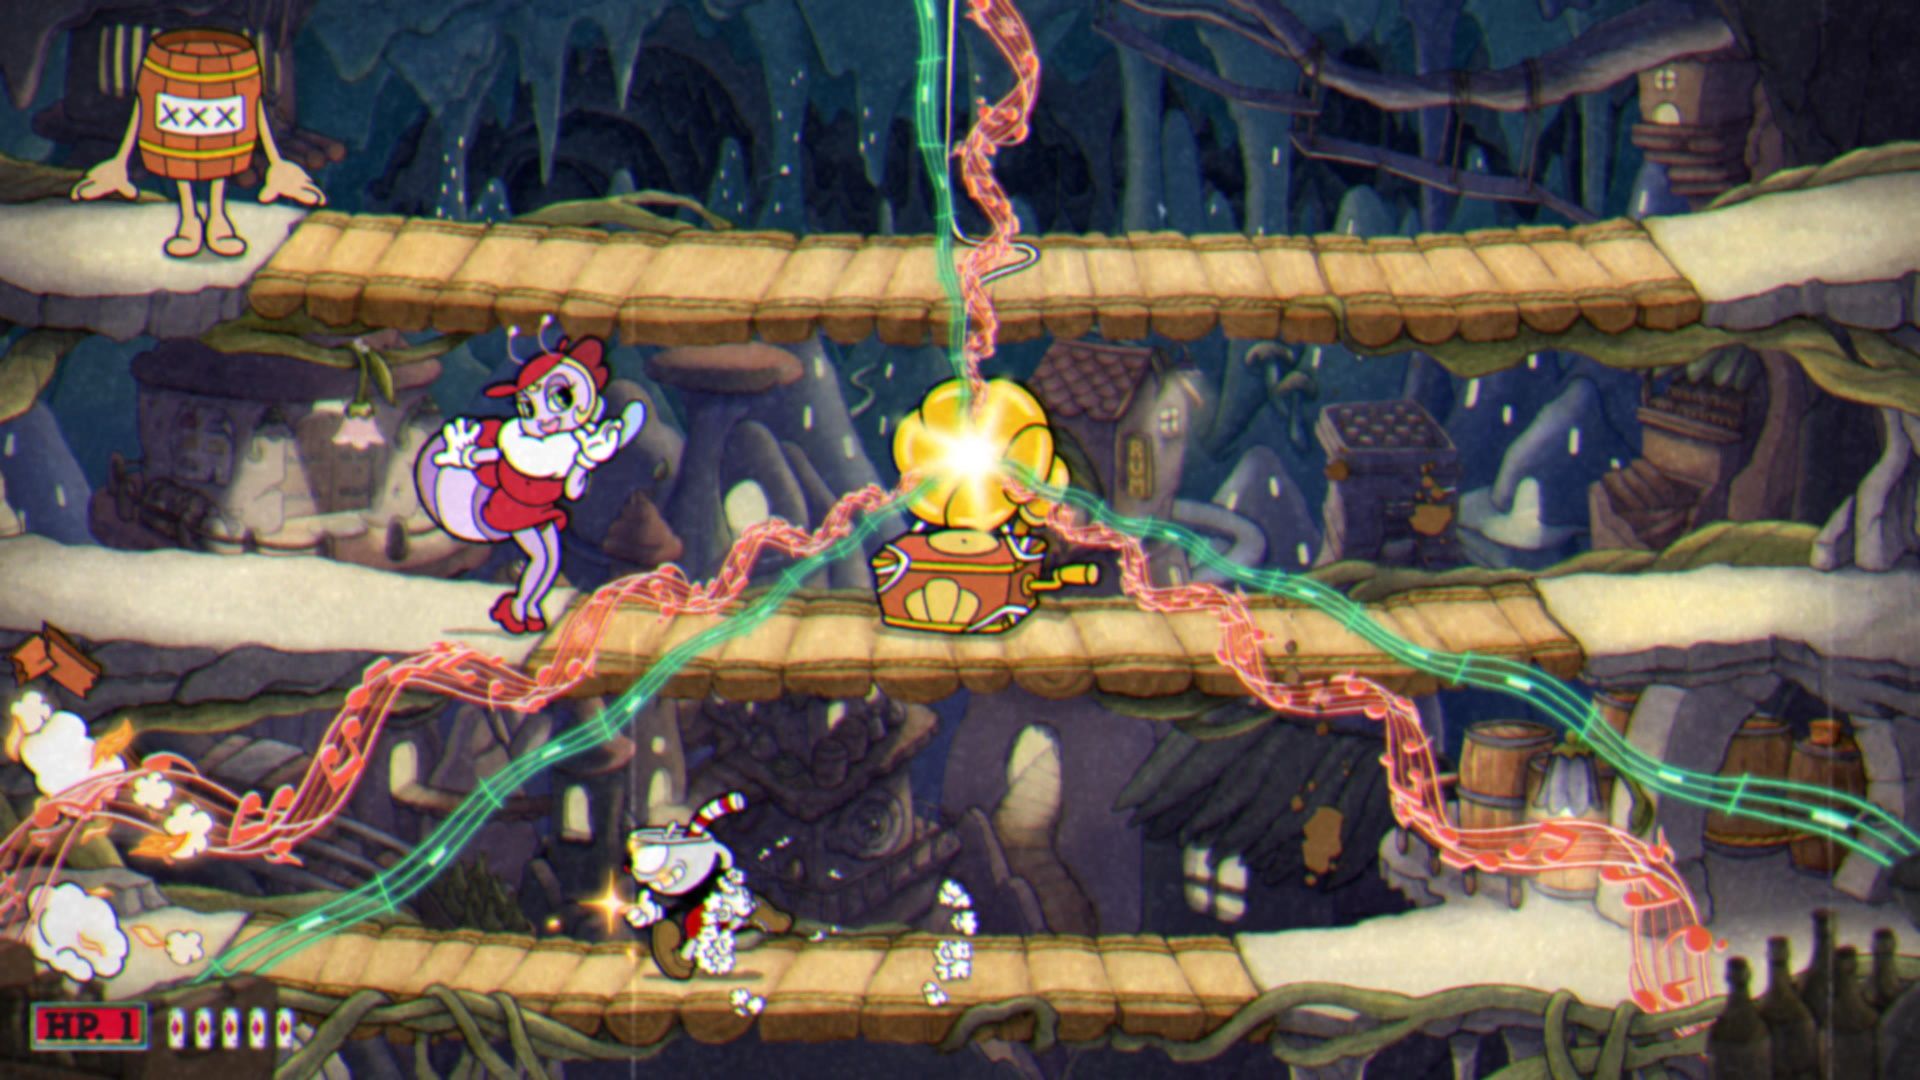 Cuphead The Delicious Course, The Moonshine Mob, The Moonshine Mob, Phase 2, Dodging sound waves